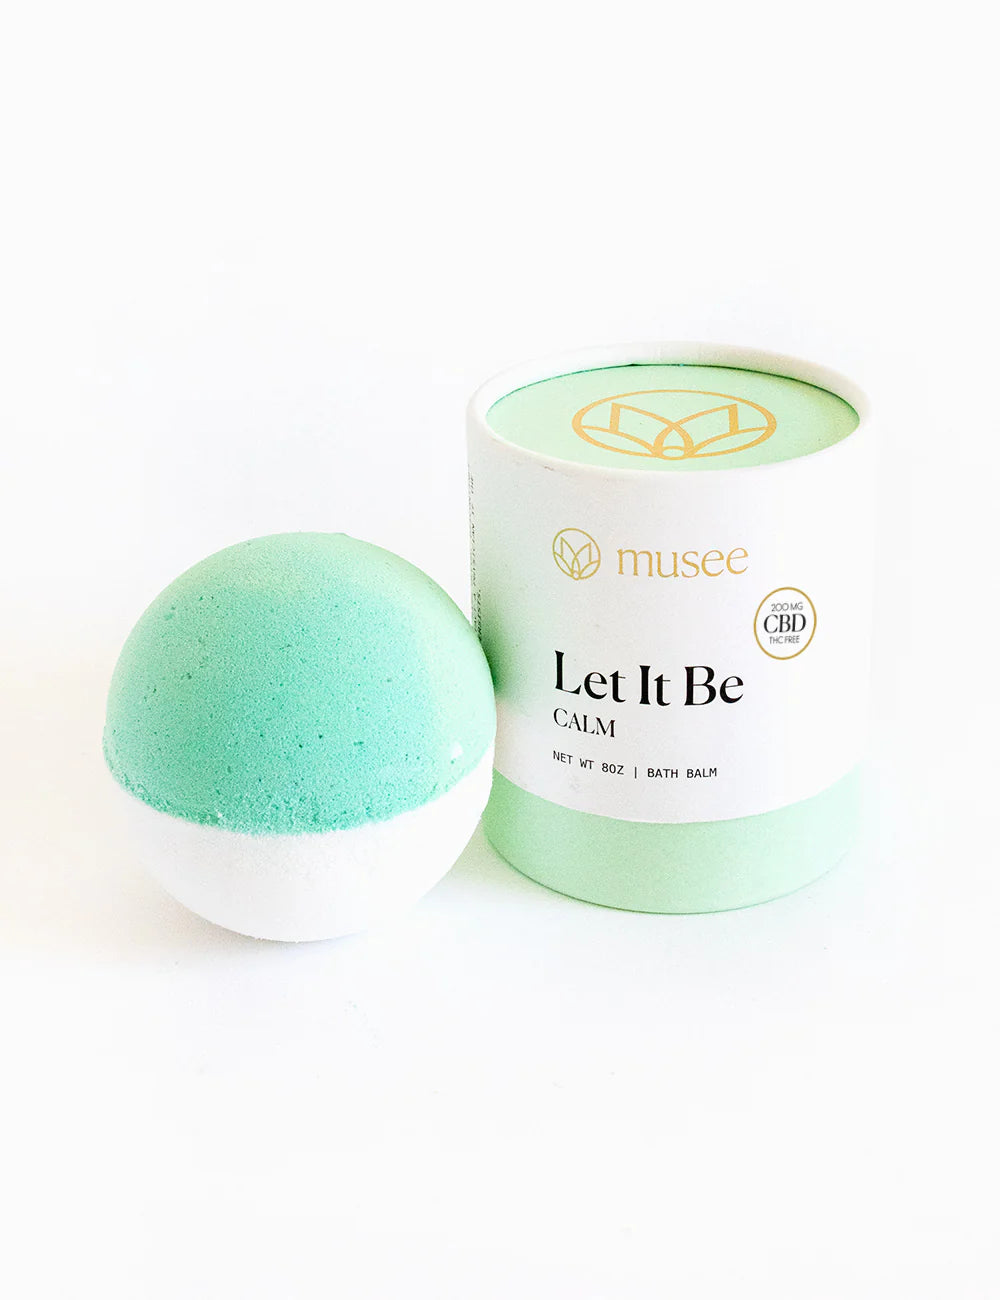 A Musee Let It Be Bath Balm in green and white next to a white container.